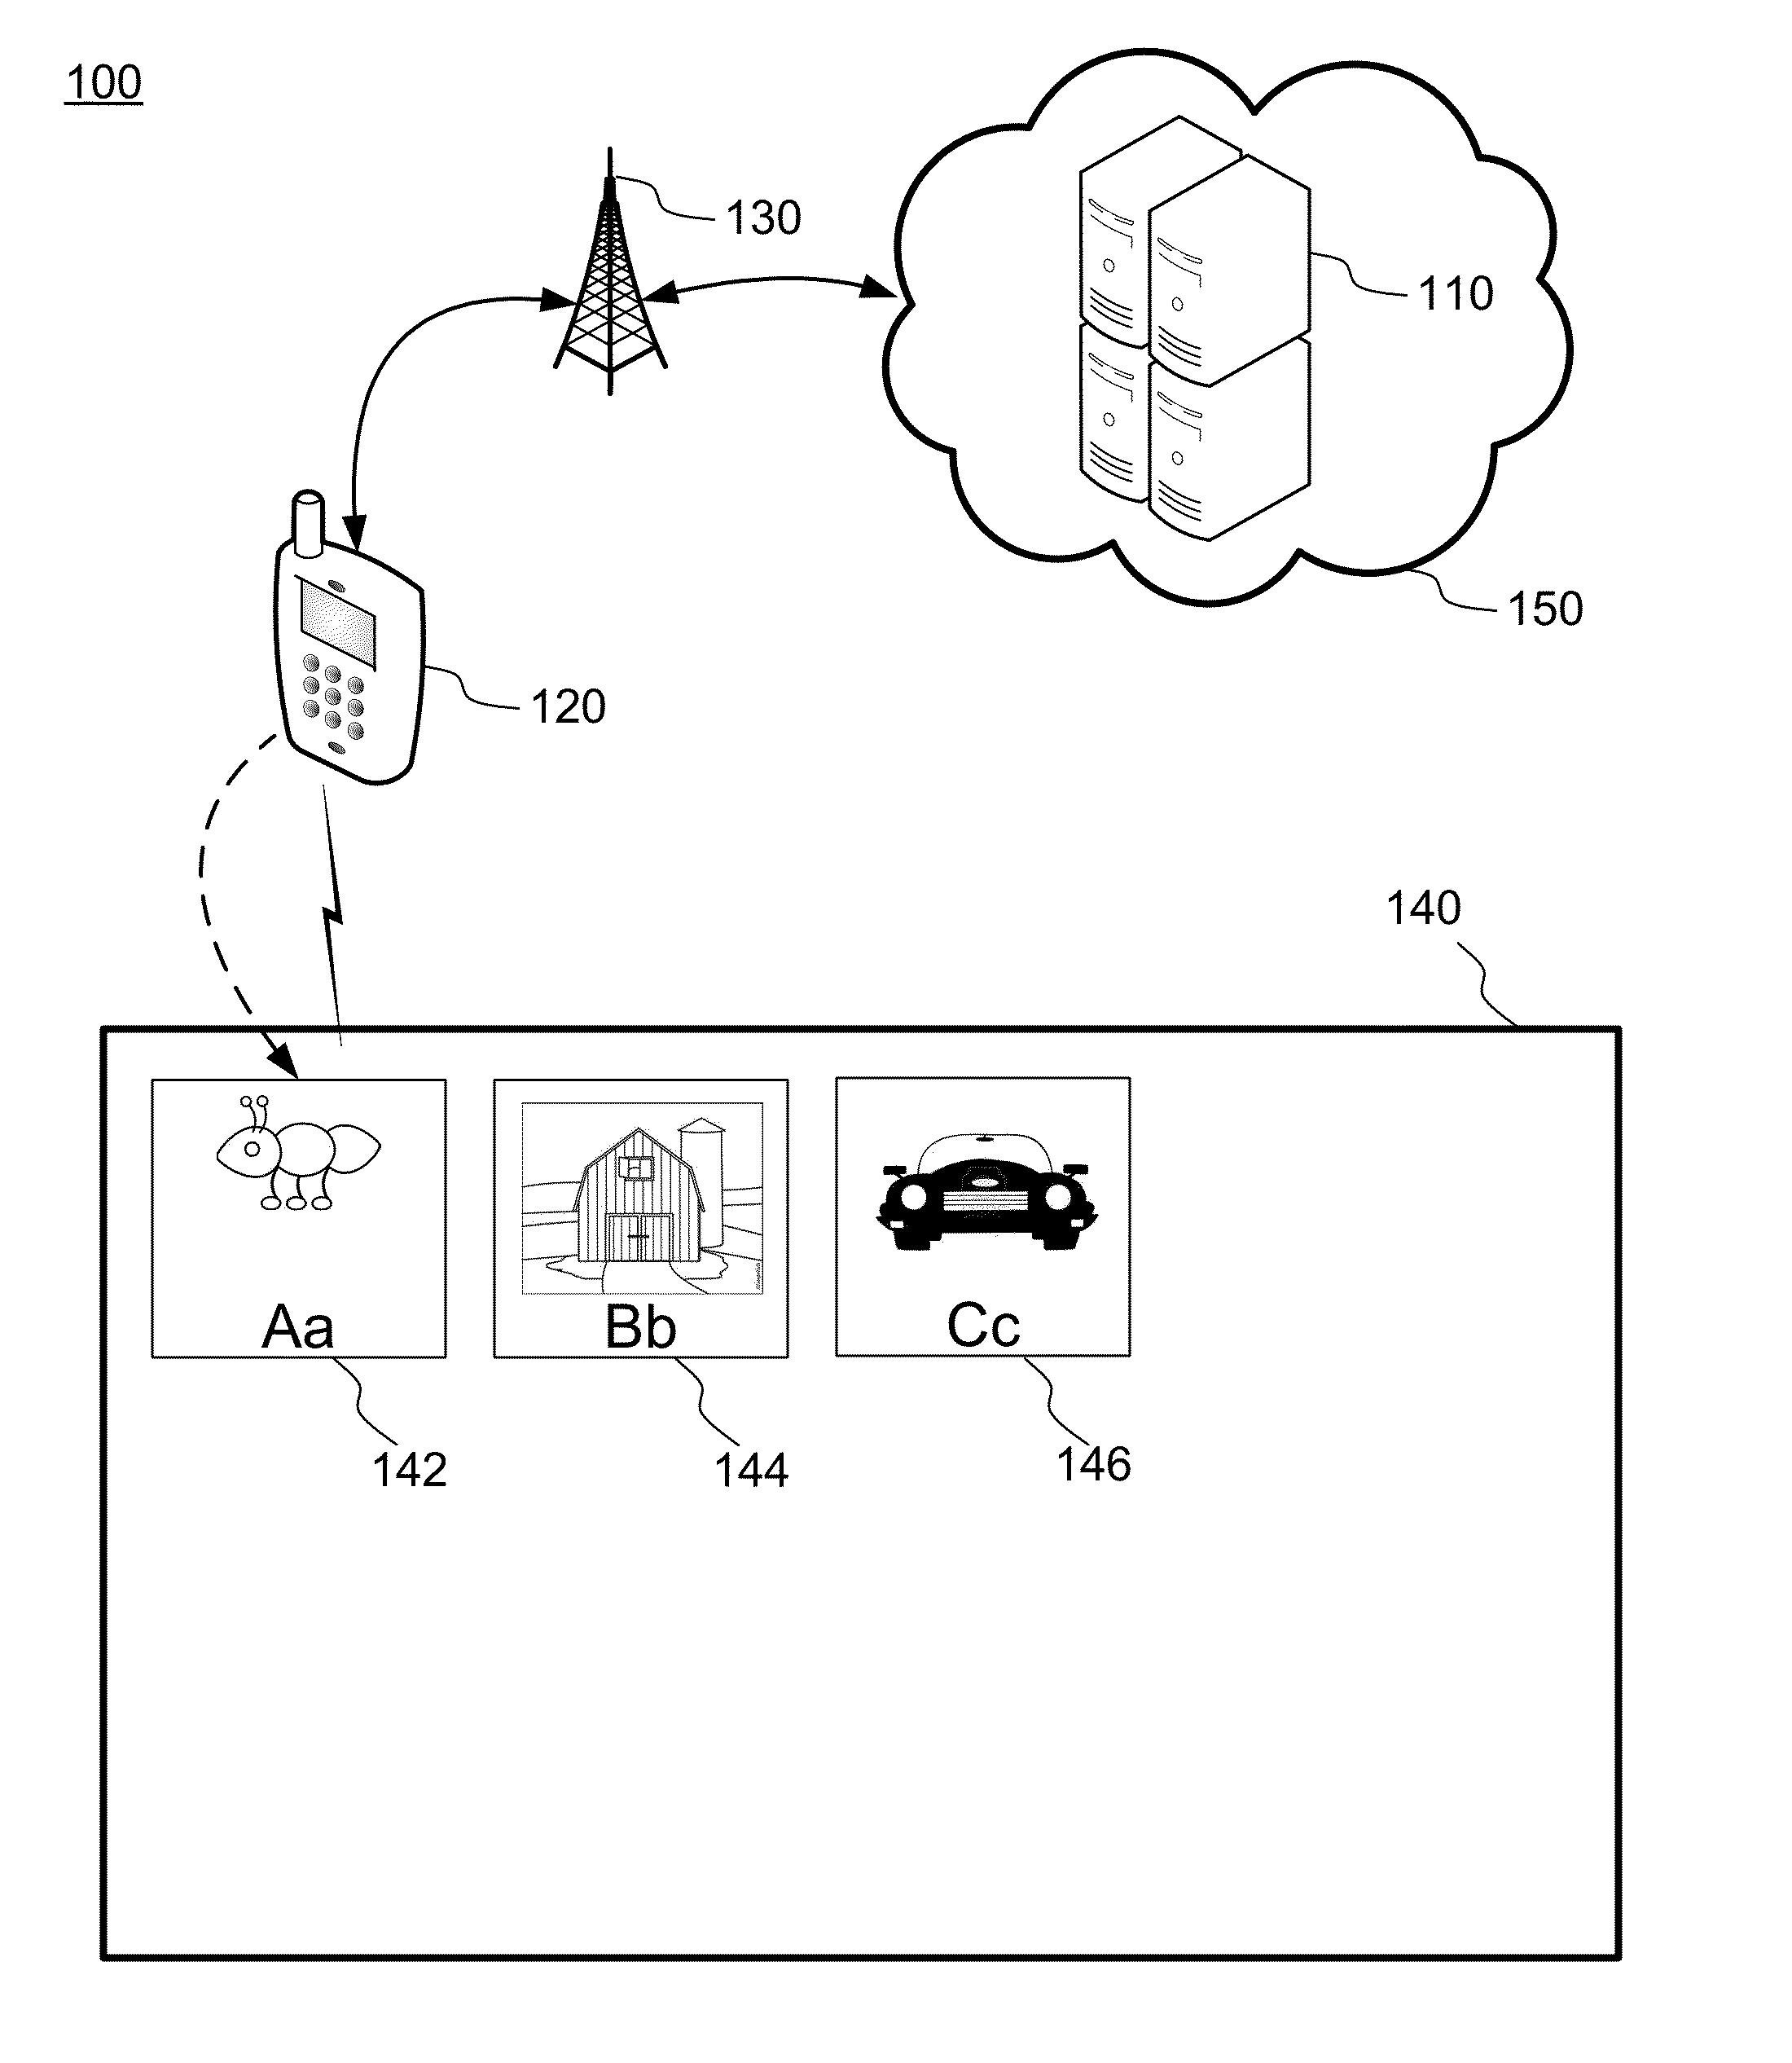 Near field communication (NFC) educational device and application